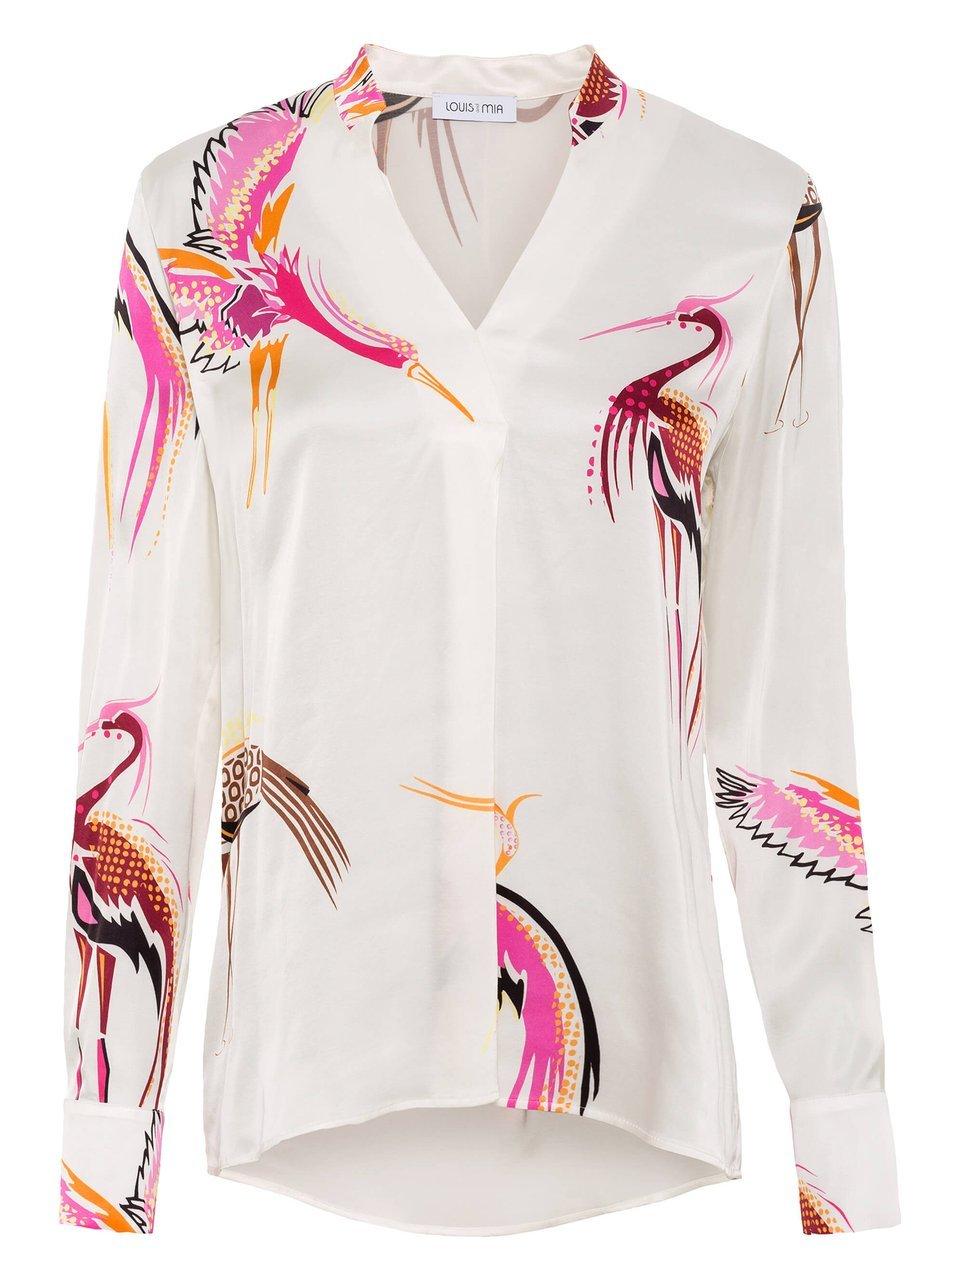 Blouse print all-over Van Louis and Mia pink